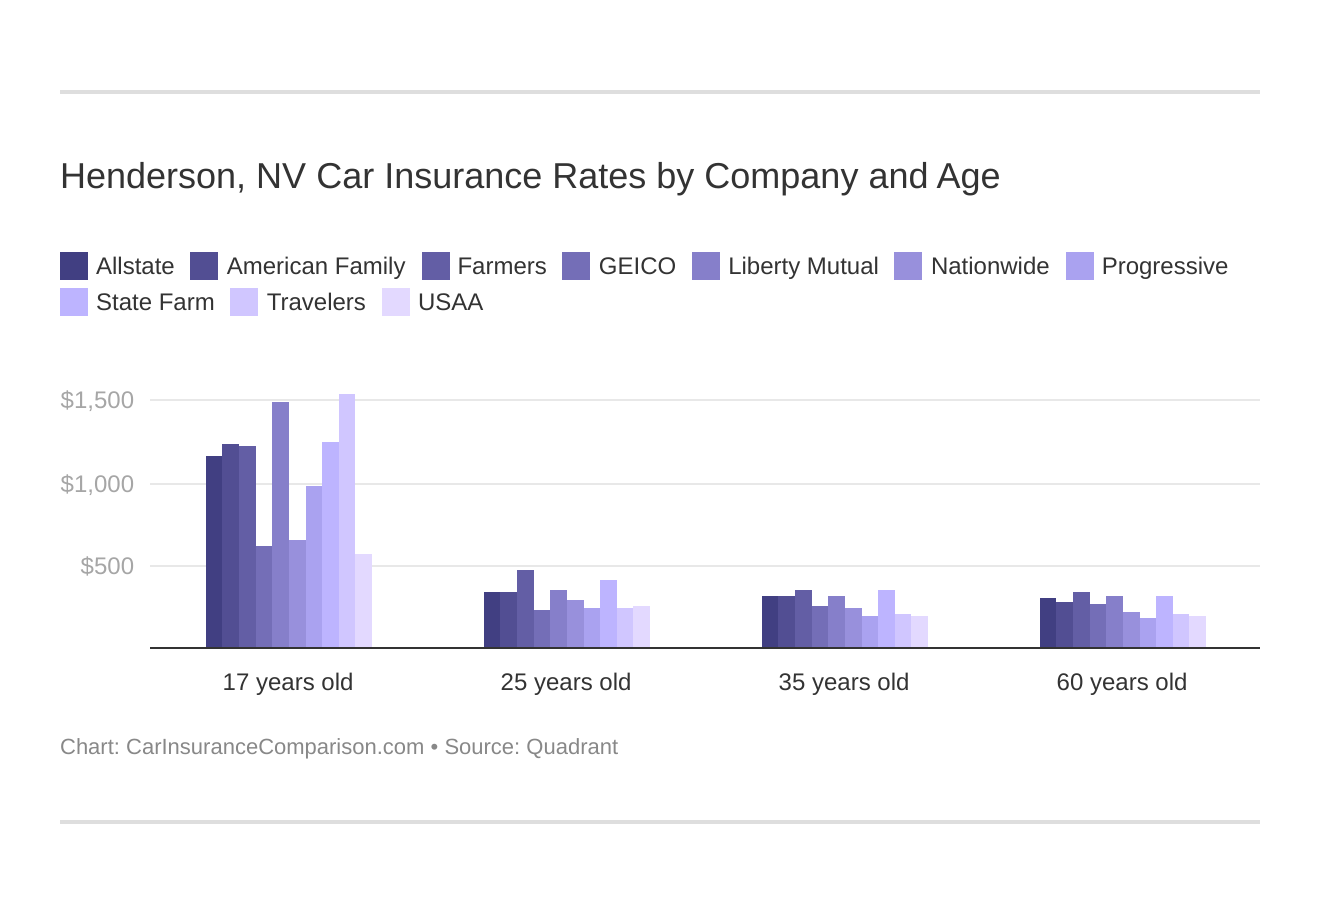 Henderson, NV Car Insurance Rates by Company and Age